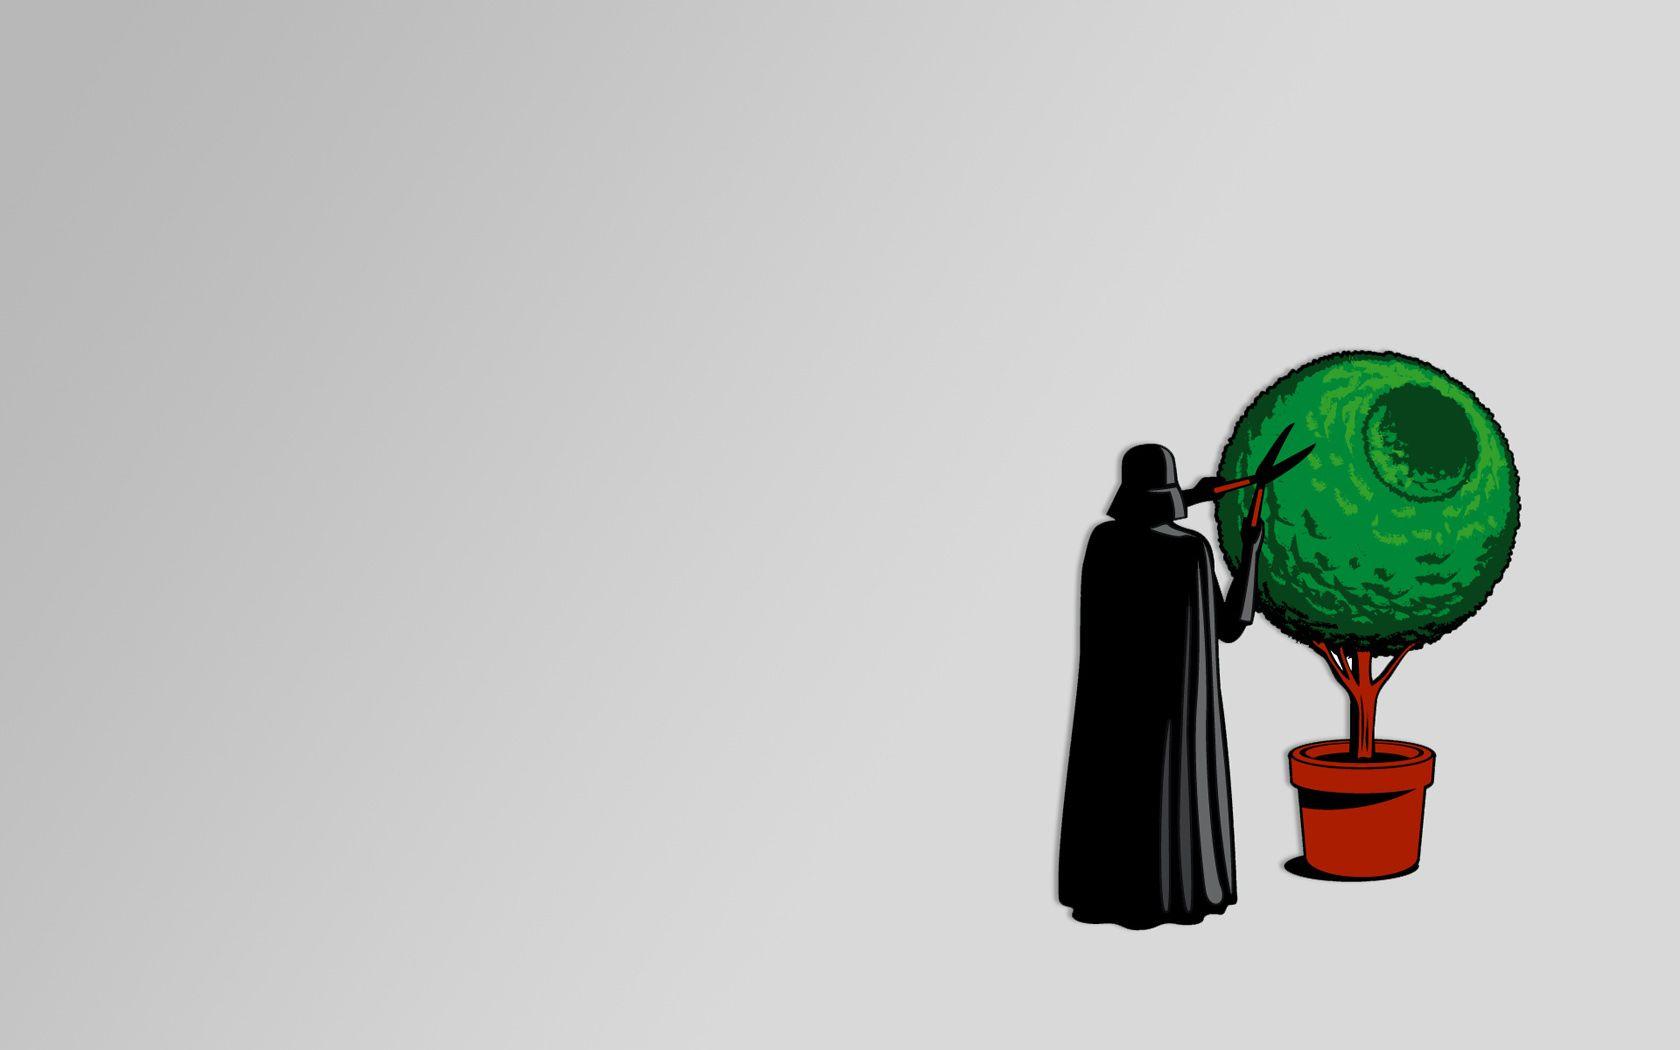 Star Wars, trees, funny, simple background, white background